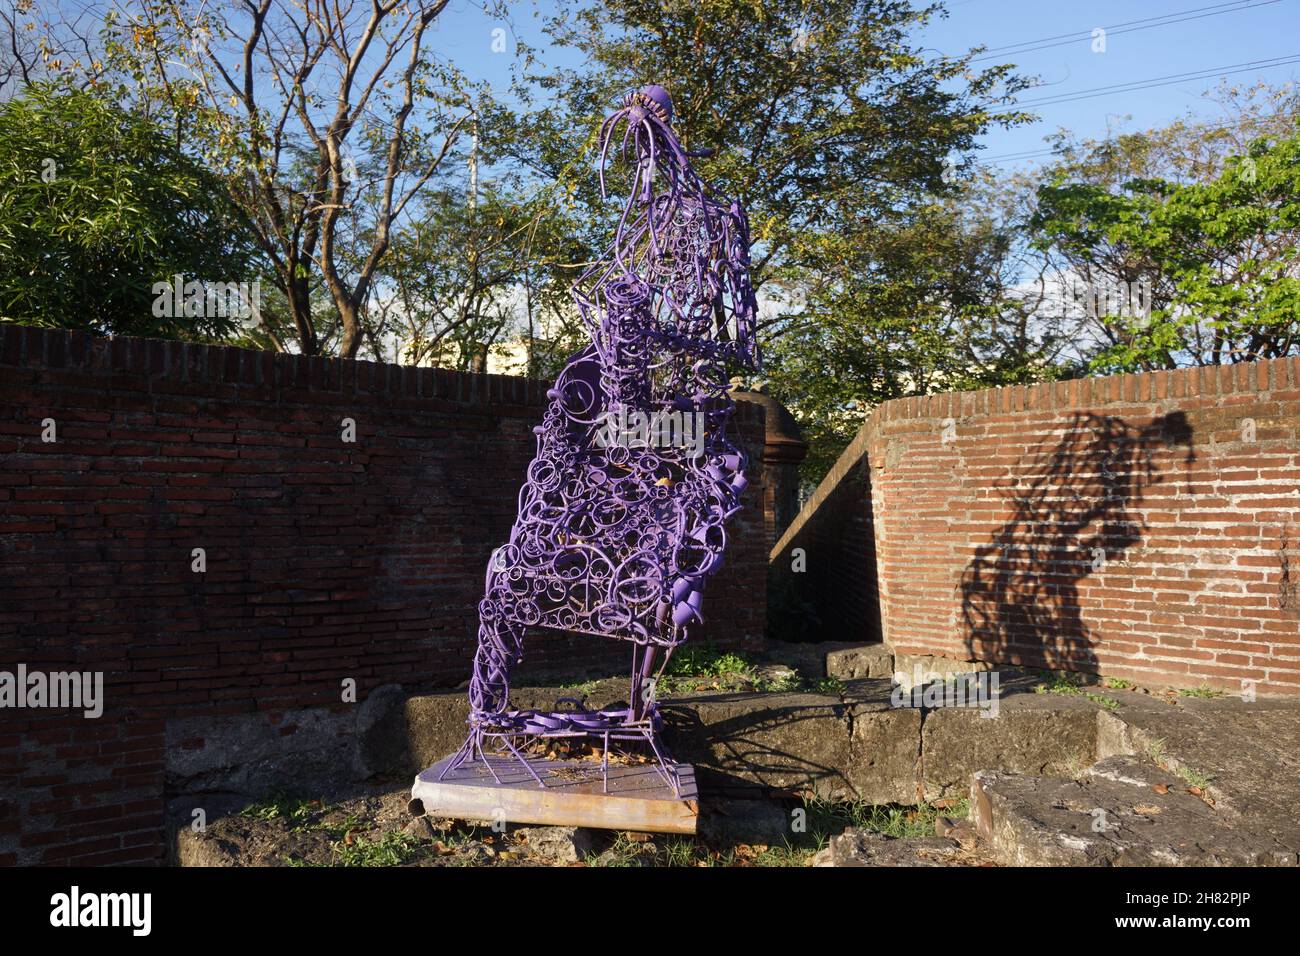 MANILA, PHILIPPINES - Mar 16, 2019: A Public art installation in the walled city of Intramuros, Manila, Philippines Stock Photo